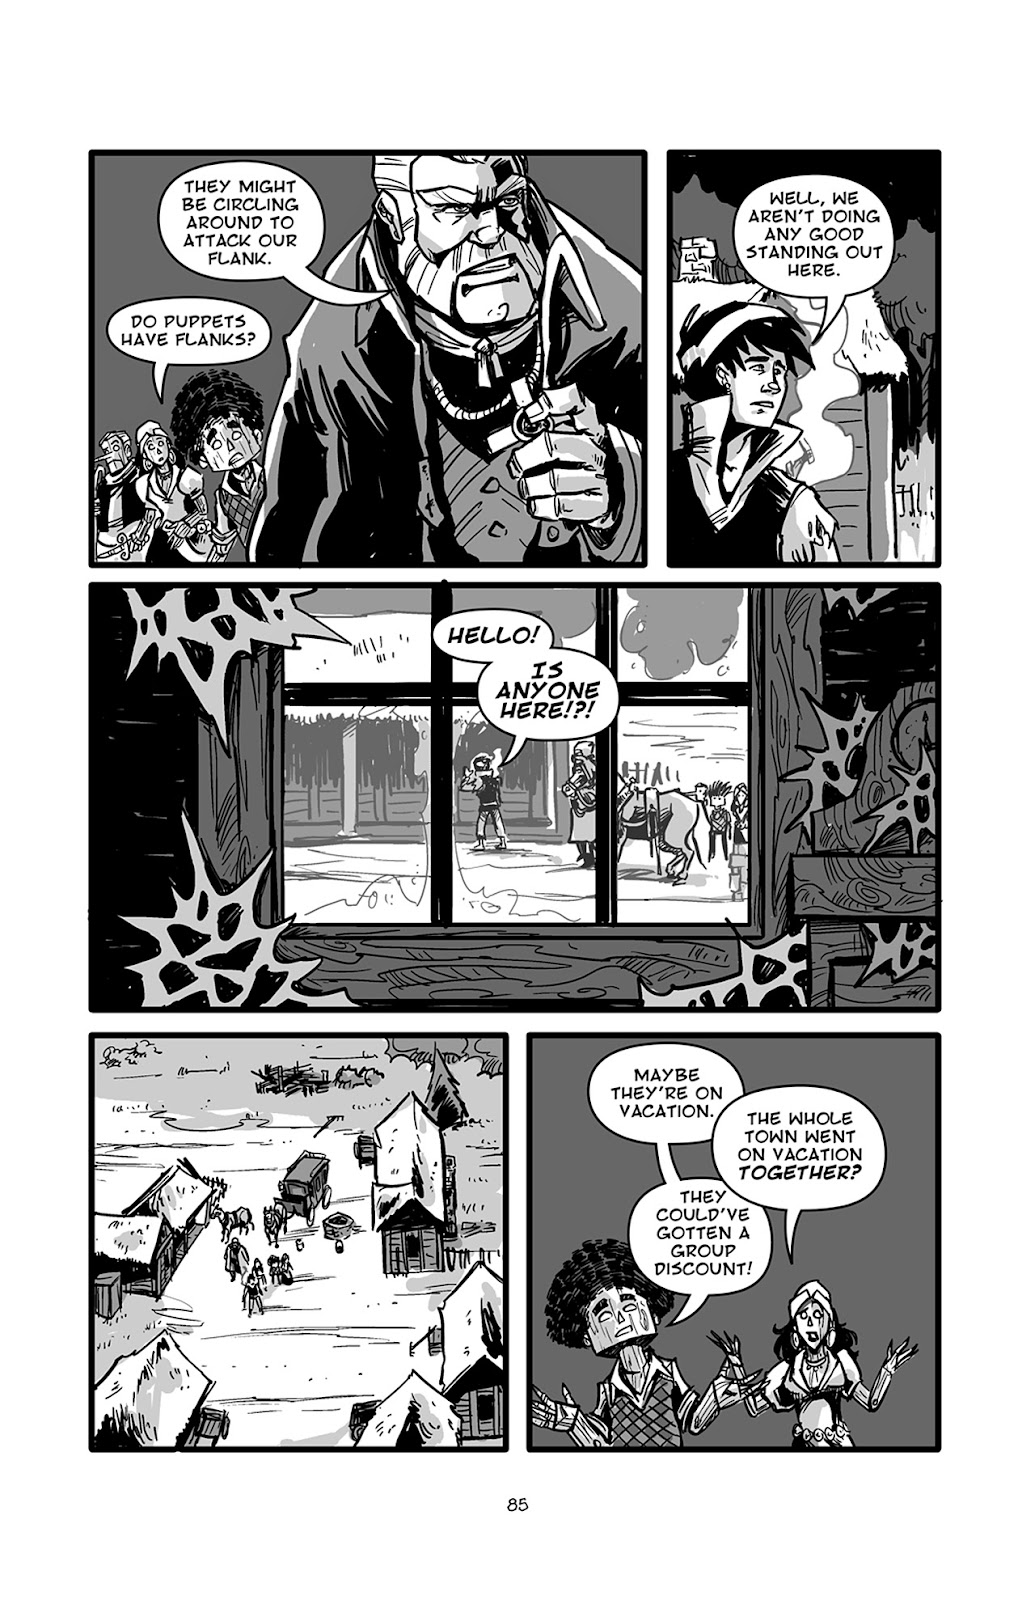 Pinocchio: Vampire Slayer - Of Wood and Blood issue 4 - Page 12